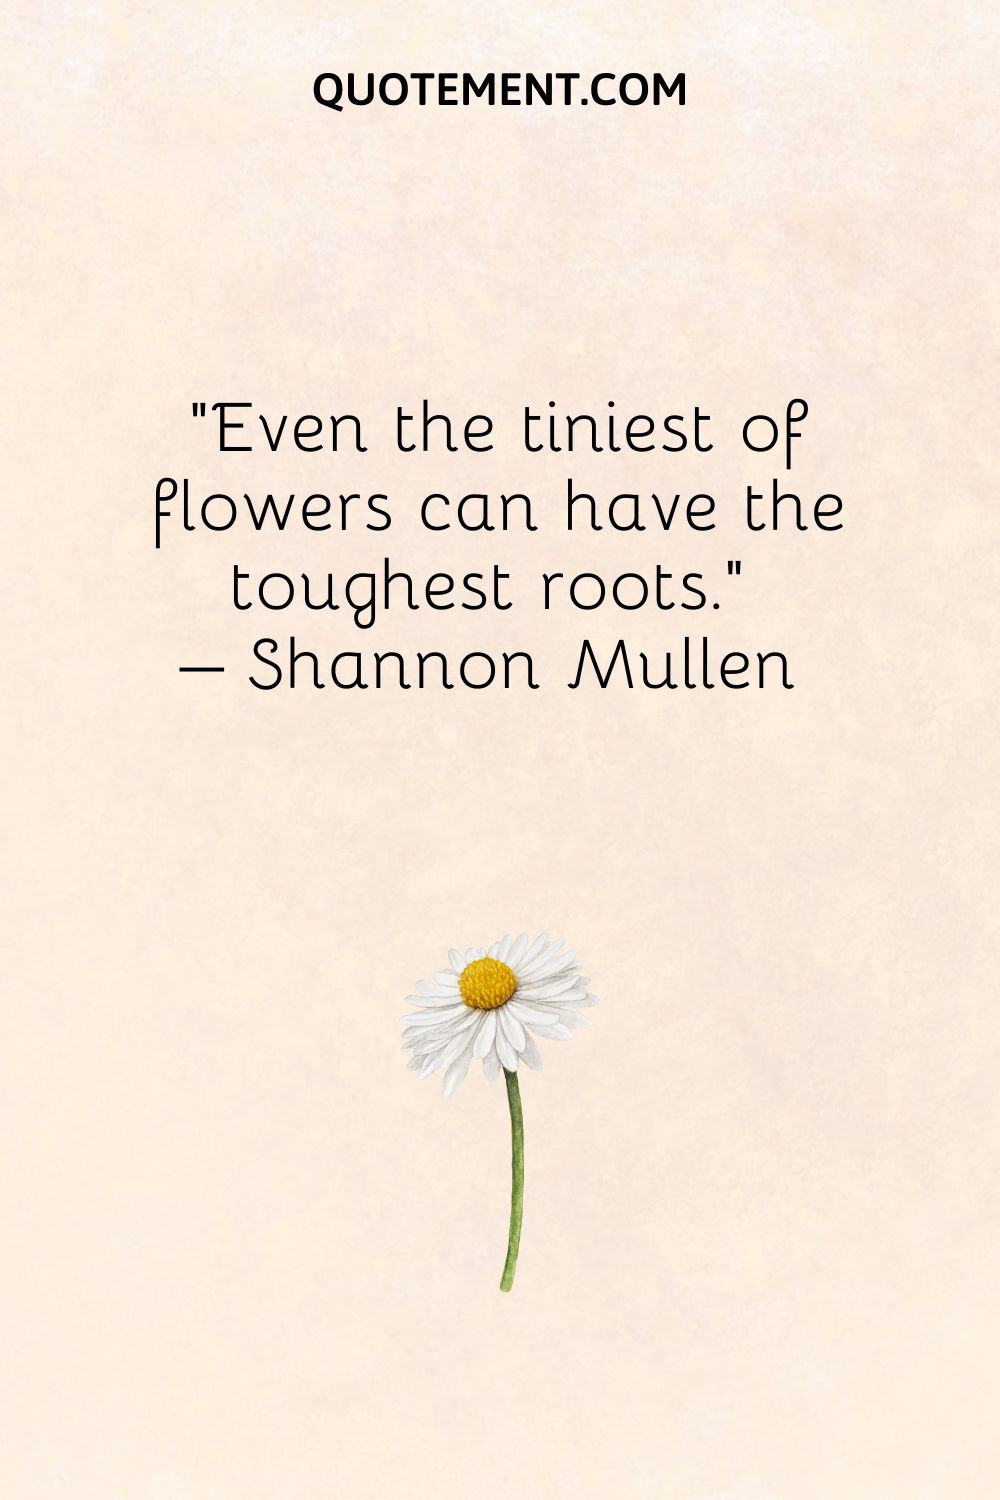 Even the tiniest of flowers can have the toughest roots